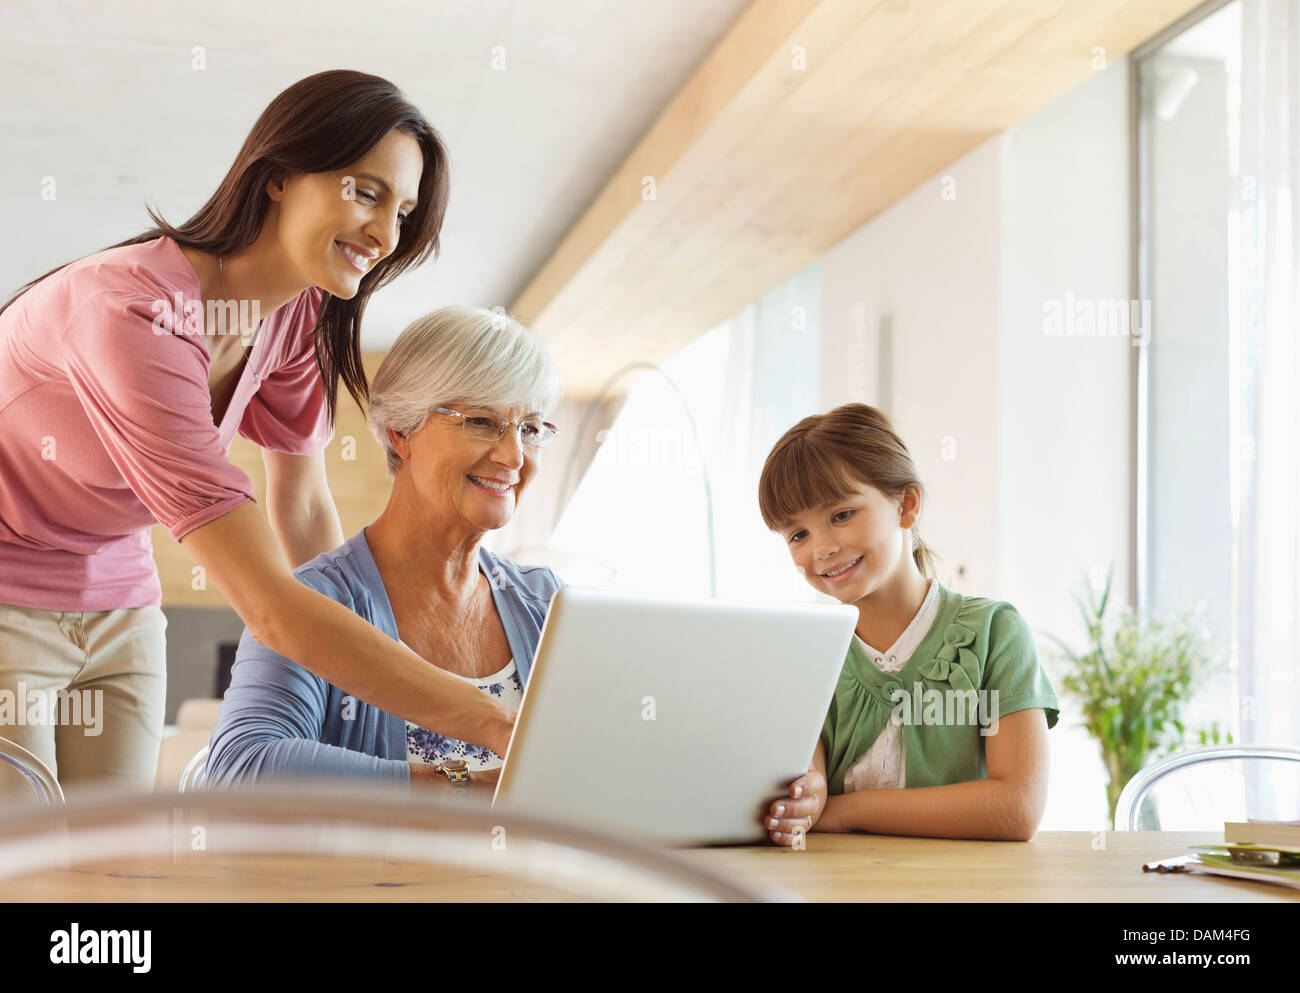 Three generations of women using tablet computer Stock Photo